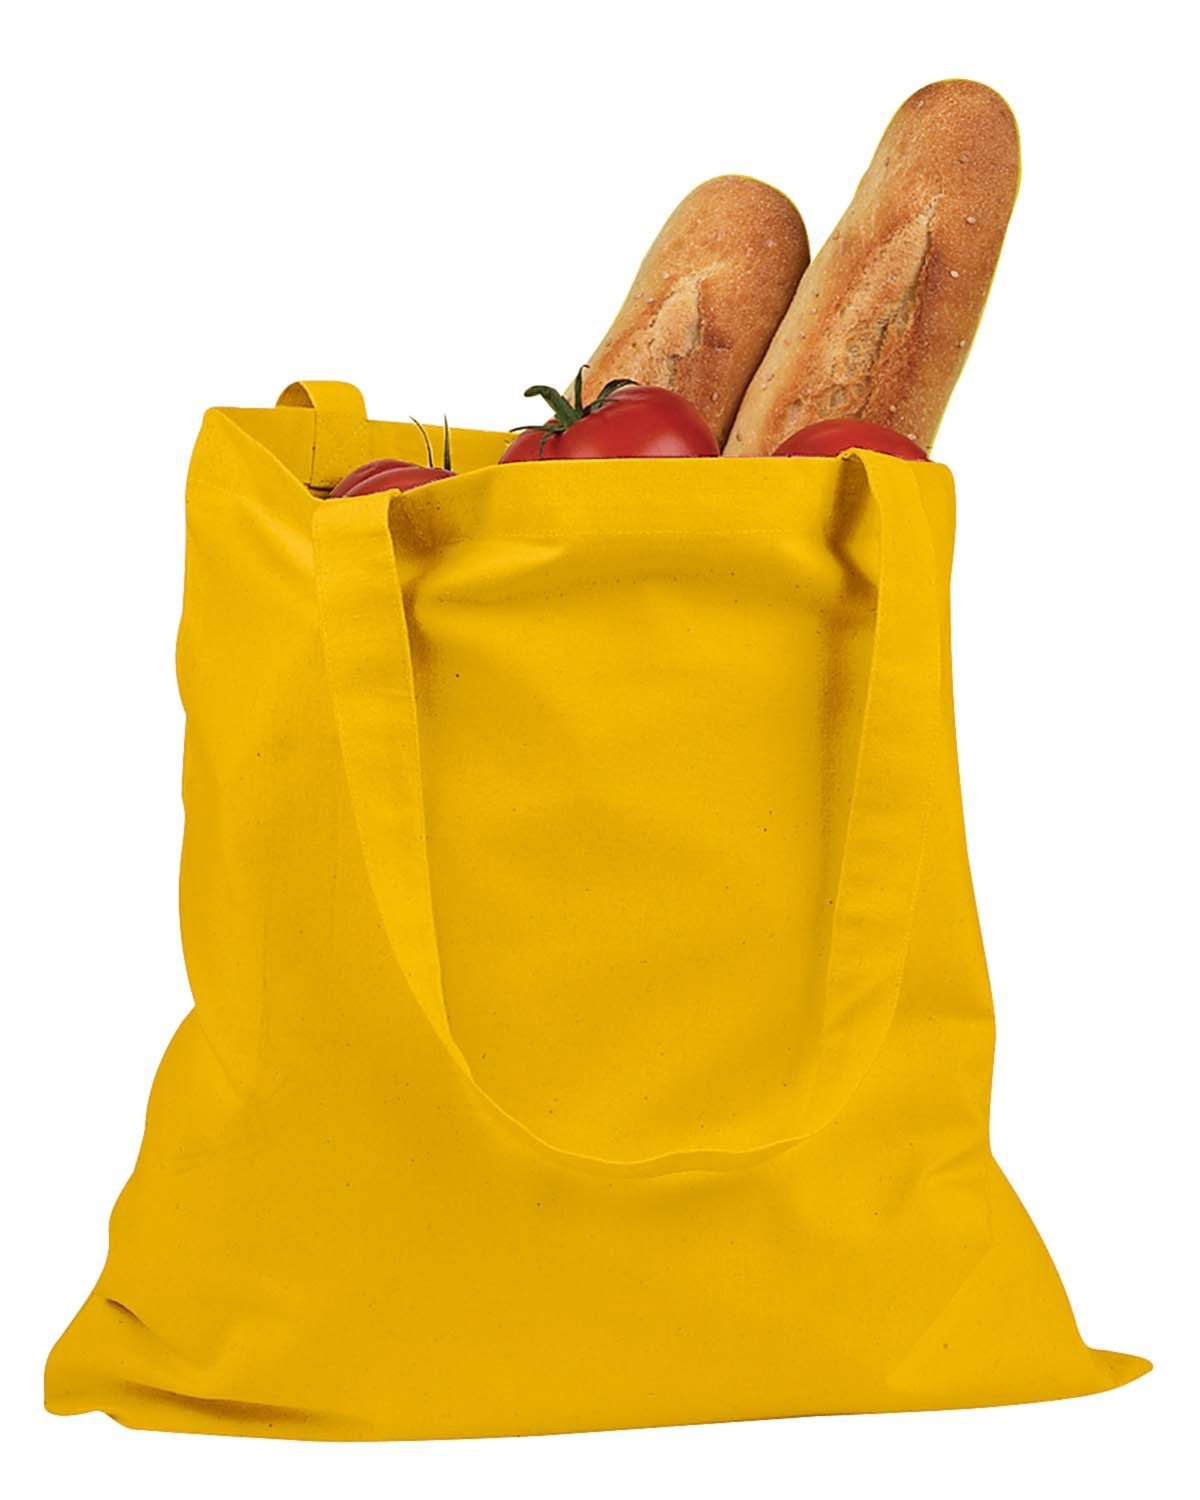 Yellow tote pictured.